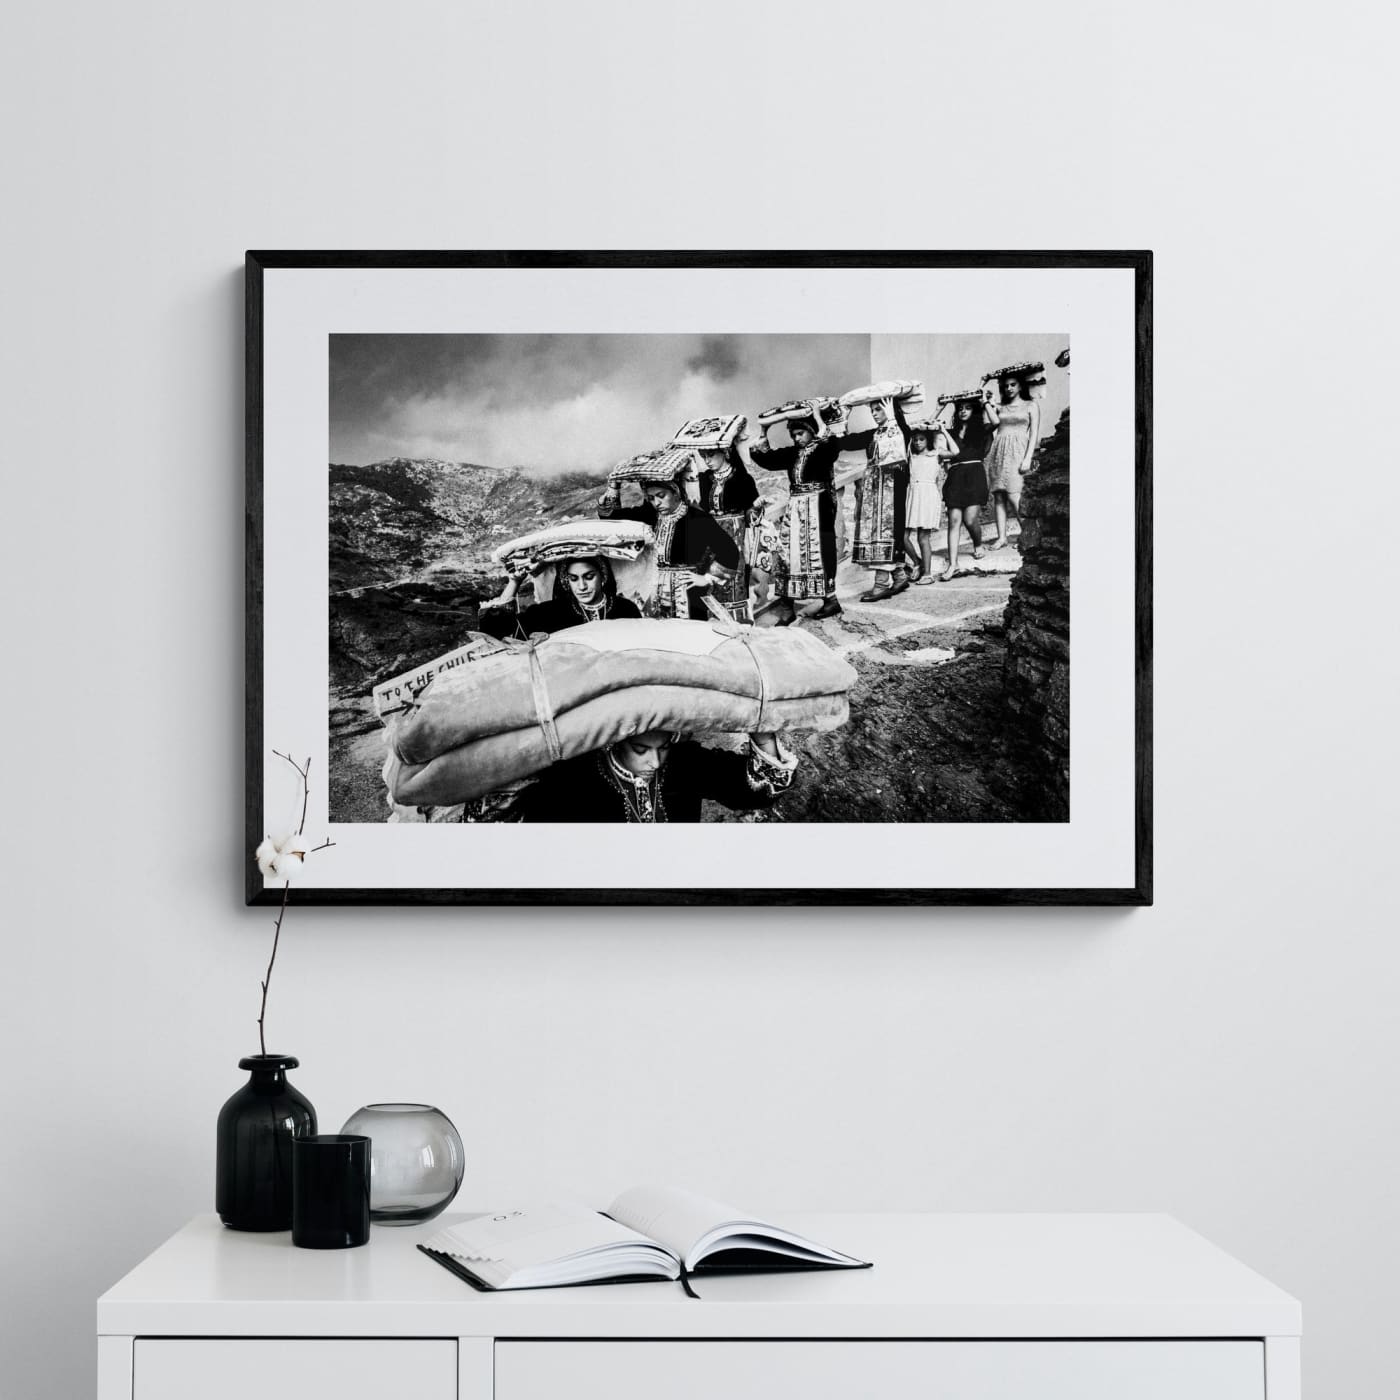 Black and White Photography Wall Art Greece | Dowry in Olympos Karpathos Dodecanese by George Tatakis - single framed photo